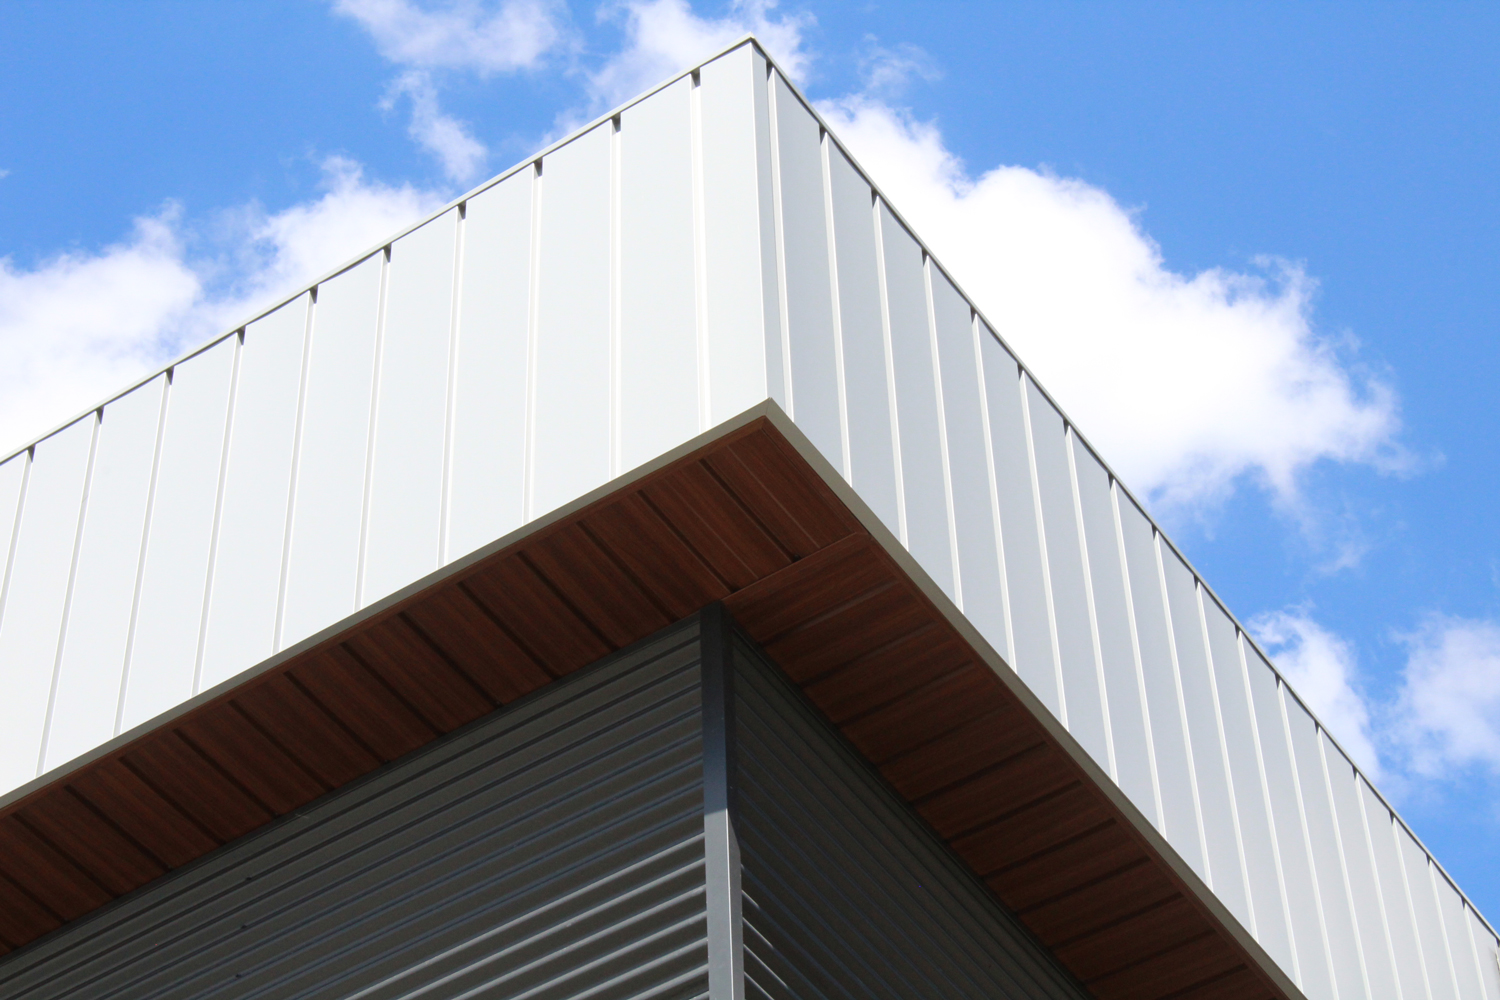 Commercial Building with 7/8 Corrugated in Carbon, Espresso Woodgrain Soffit, and custom panels in Melchers Green and Bright White